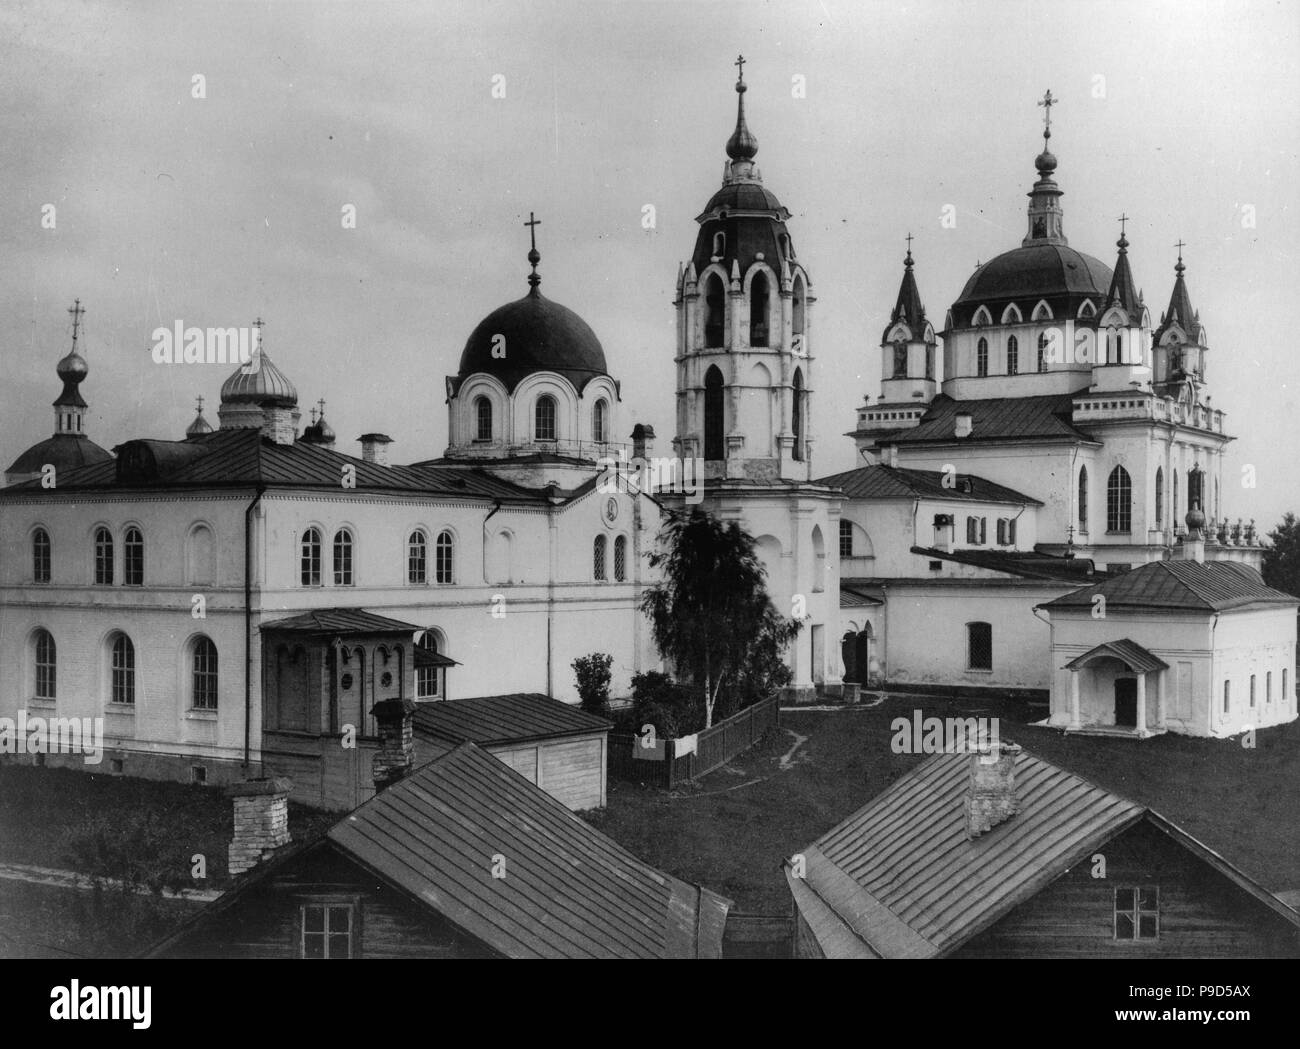 The Monastery of the Immaculate Conception in Moscow. Museum: Russian State Film and Photo Archive, Krasnogorsk. Stock Photo